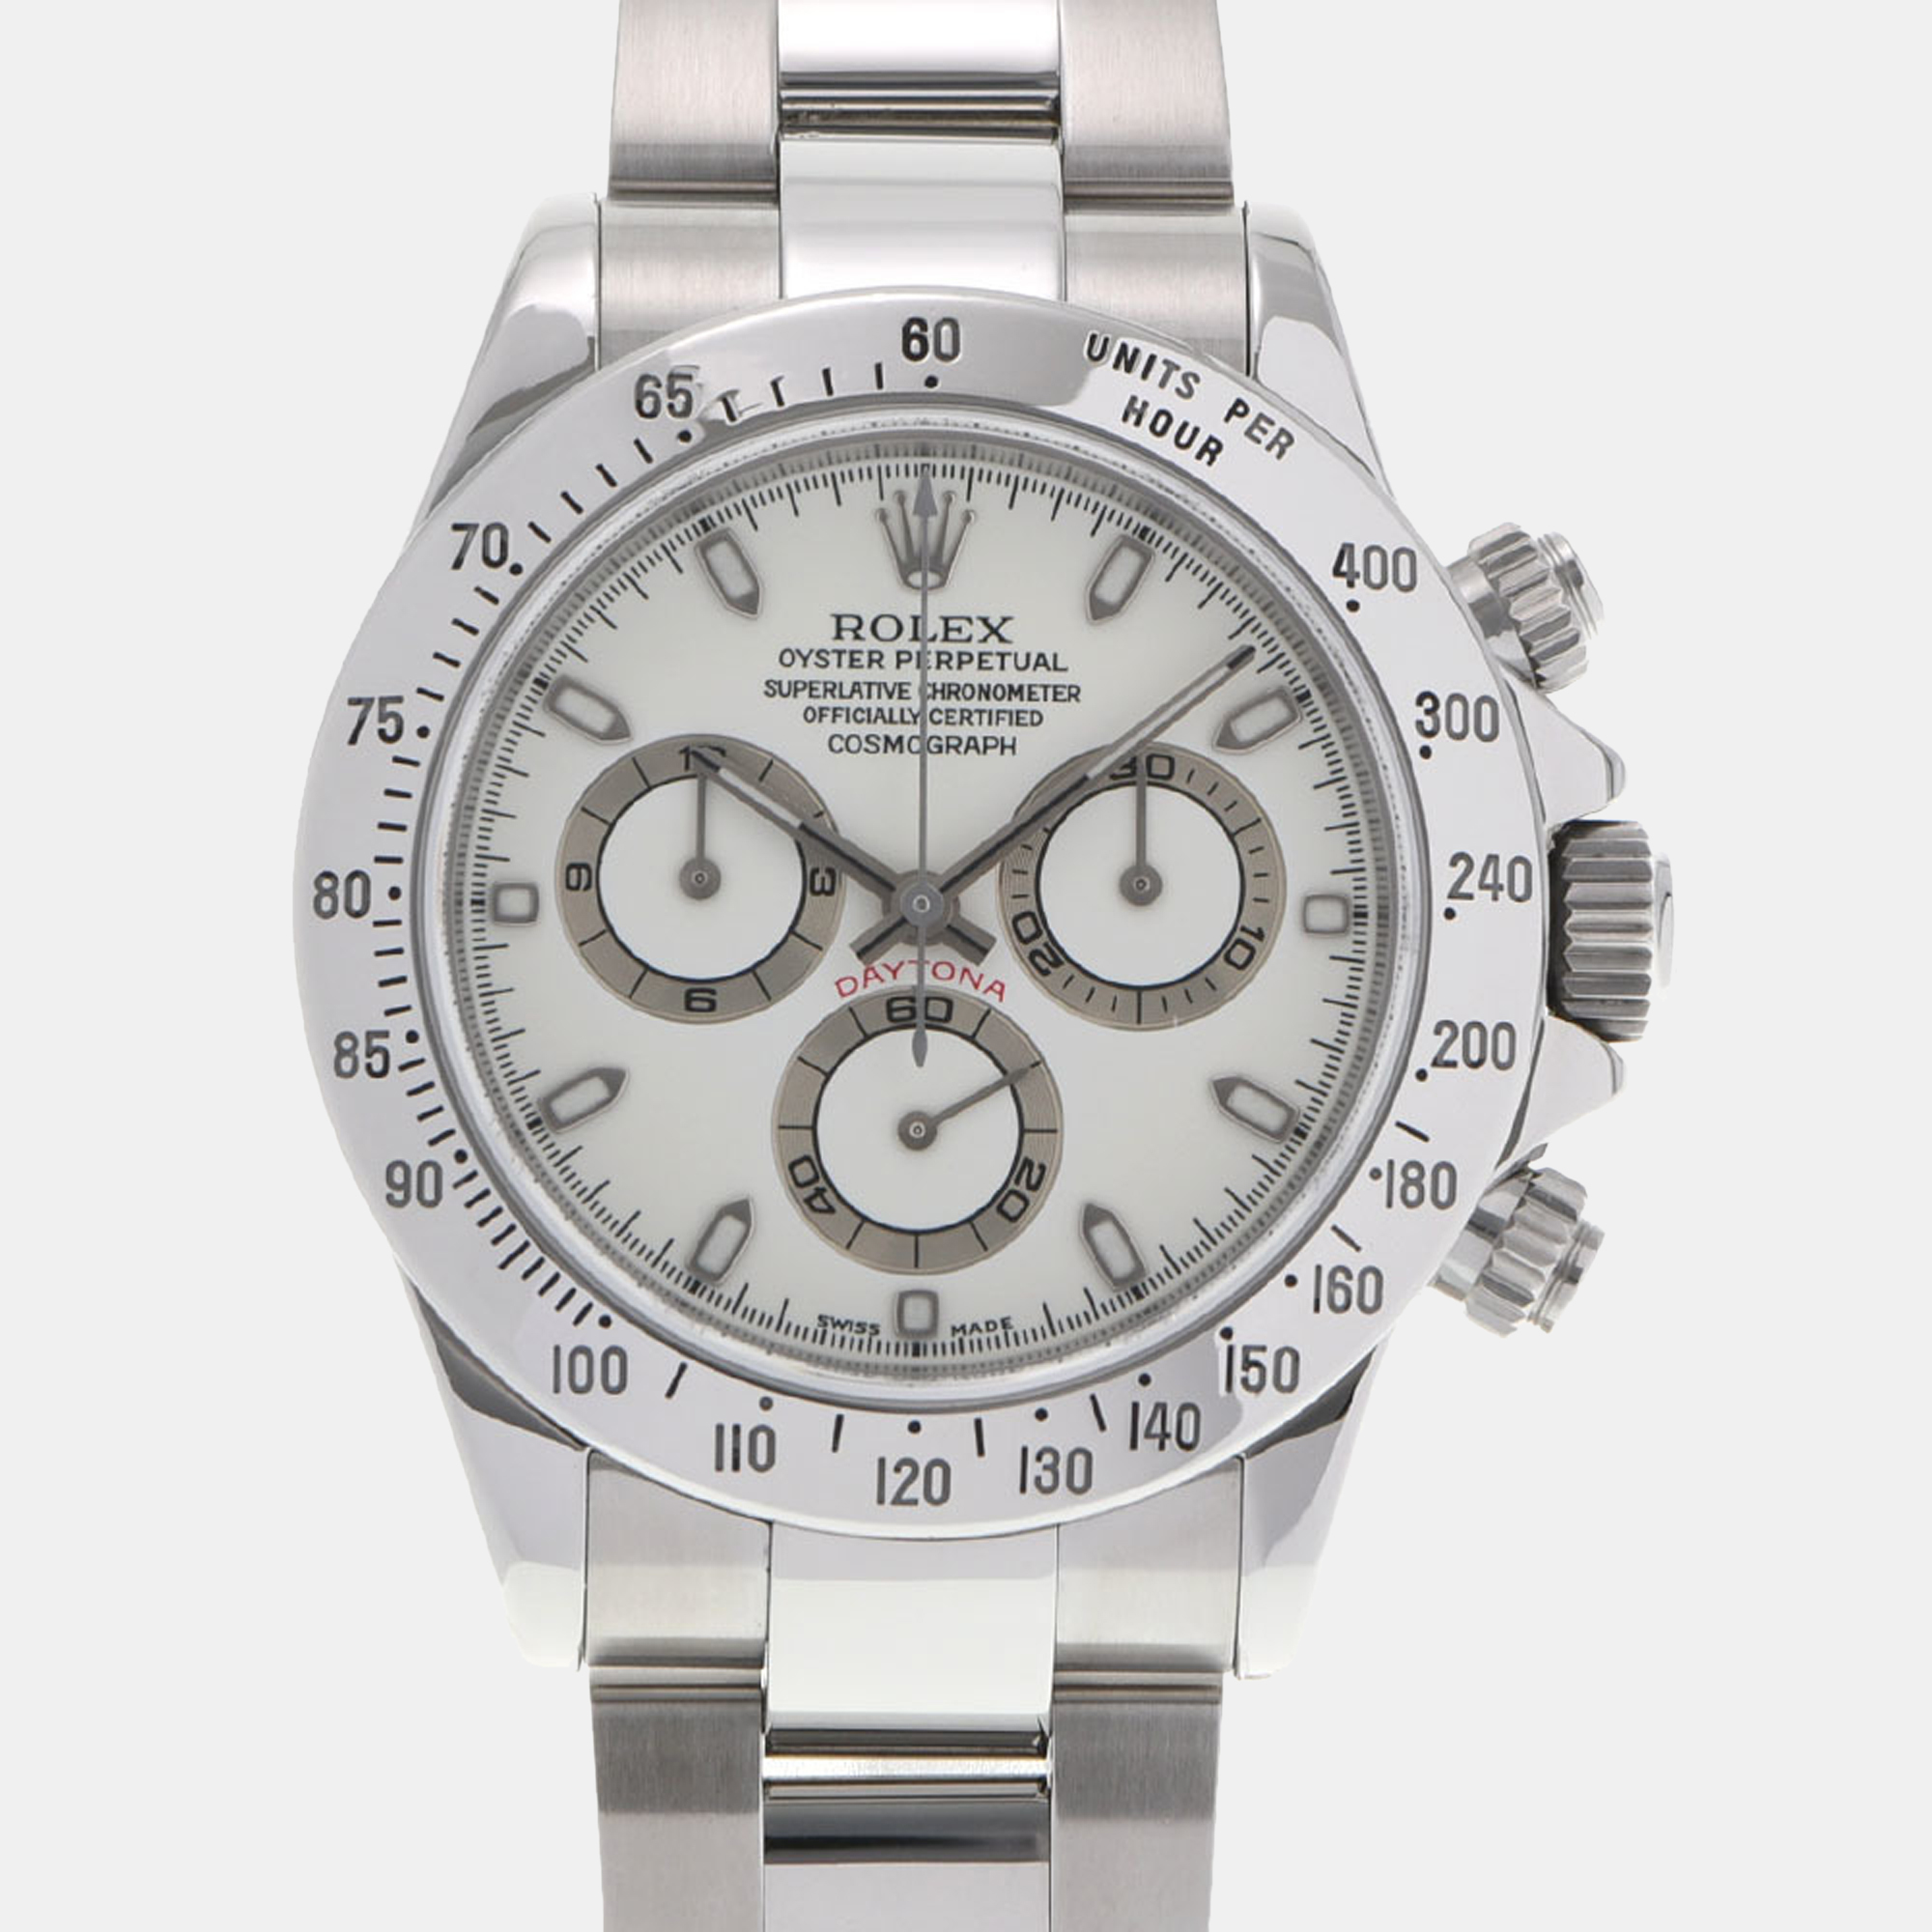 

Rolex White Stainless Steel Cosmograph Daytona 116520 Automatic Men's Wristwatch 40 mm